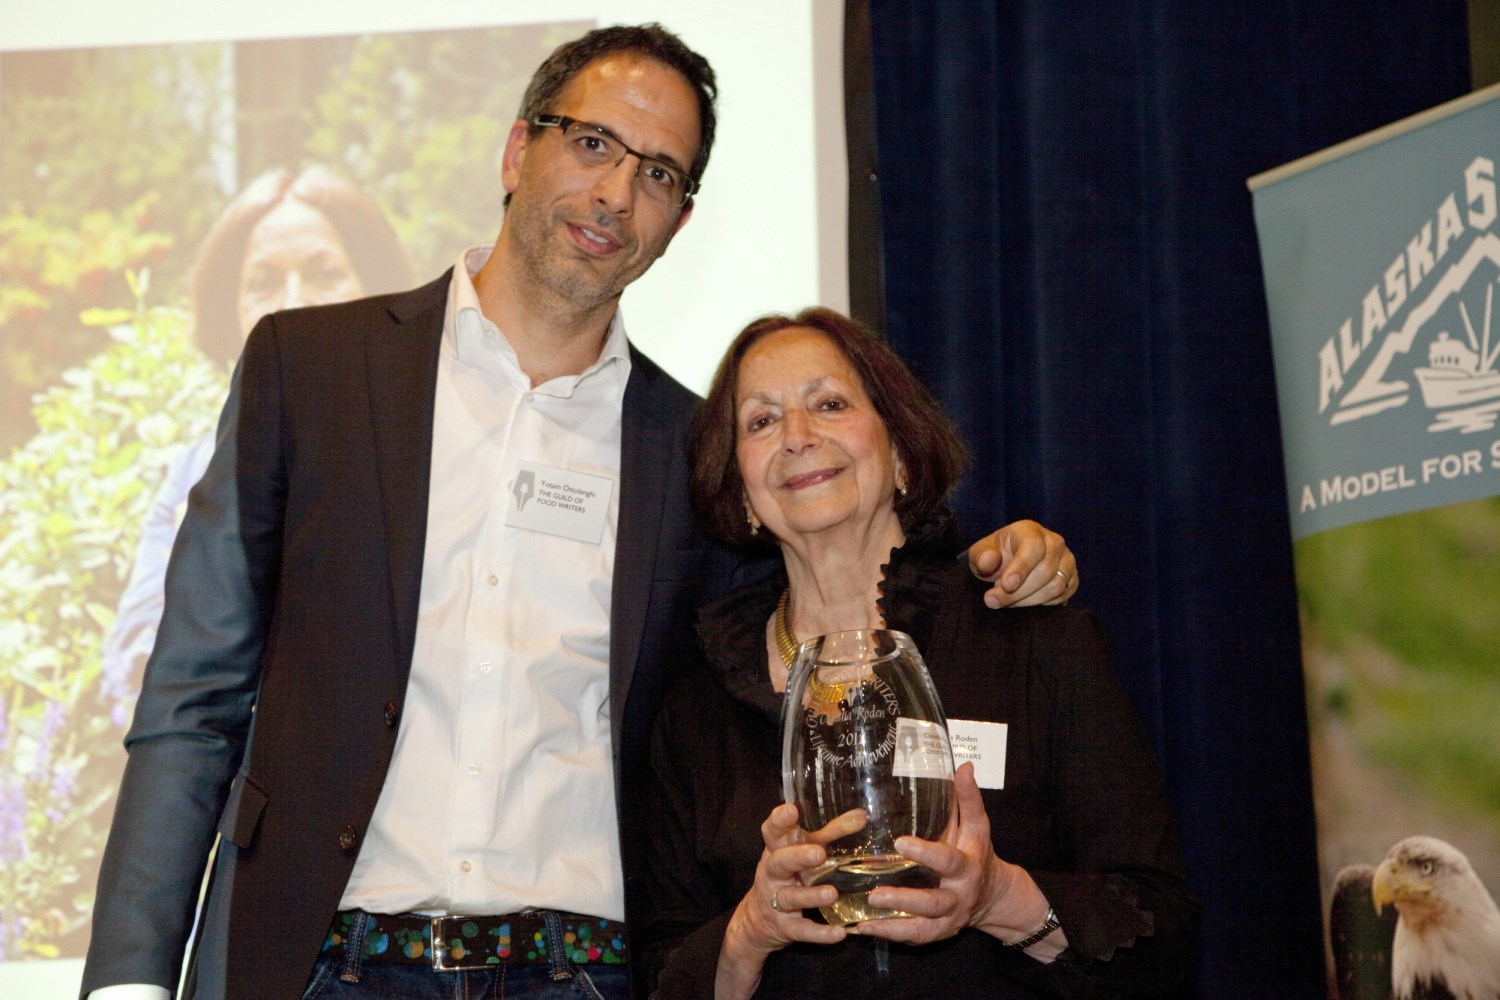 Yotam Ottolenghi presenting Claudia Roden with the Lifetime Achievement Award